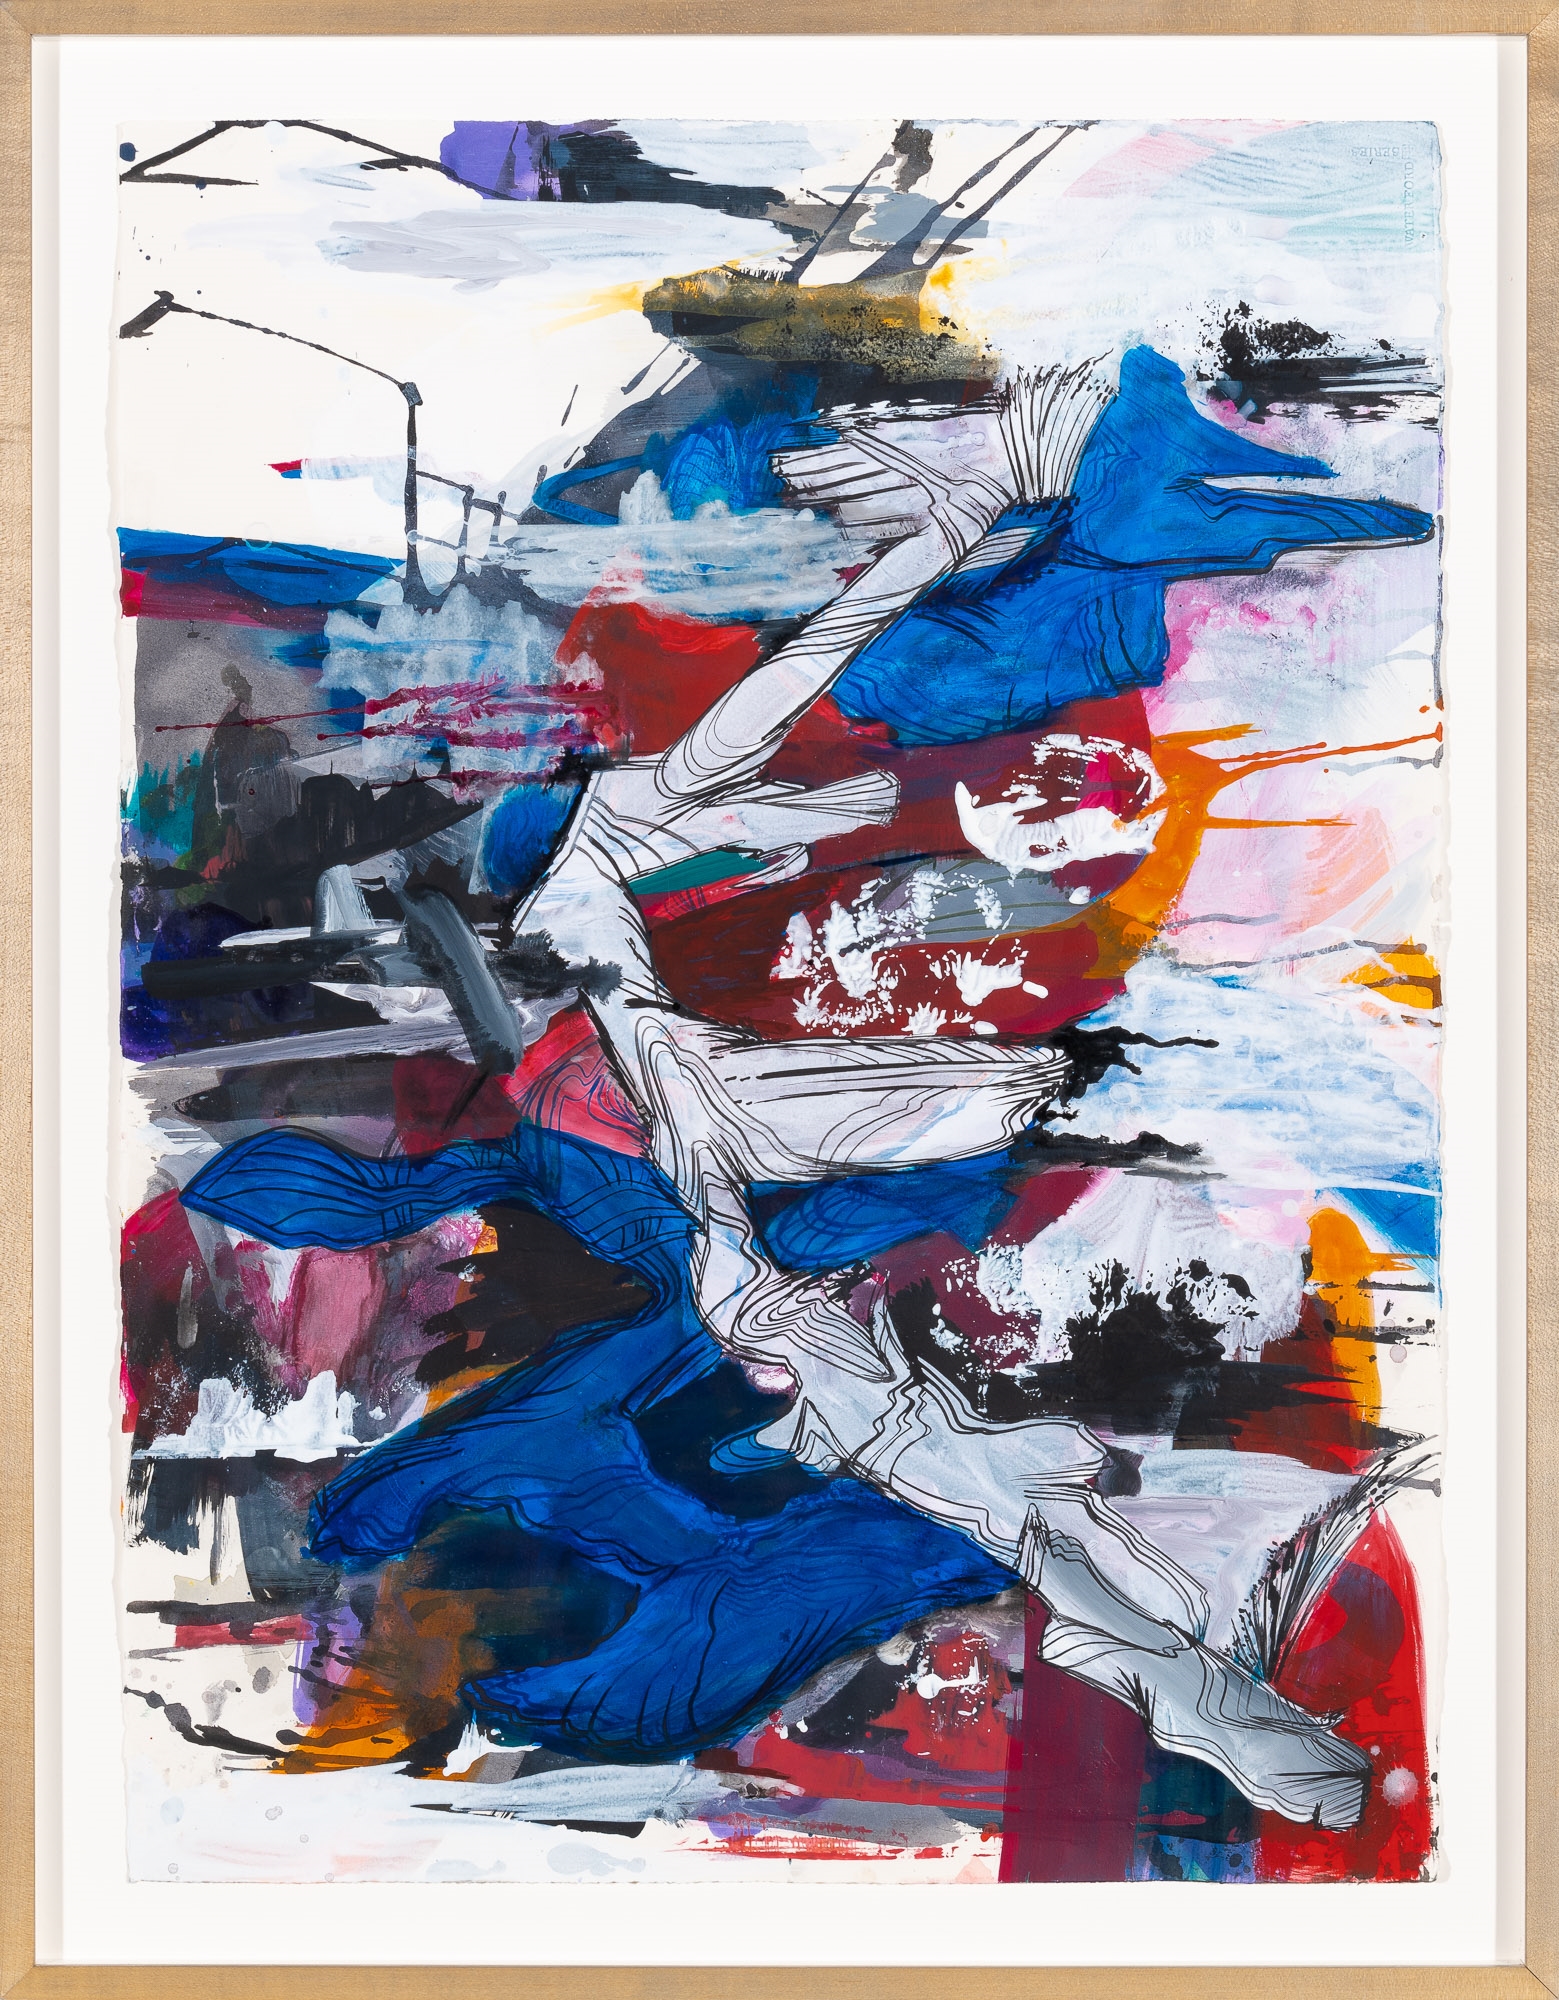 Artwork by Suling Wang, Untitled, 2005, Made of Acrylic and ink on paper